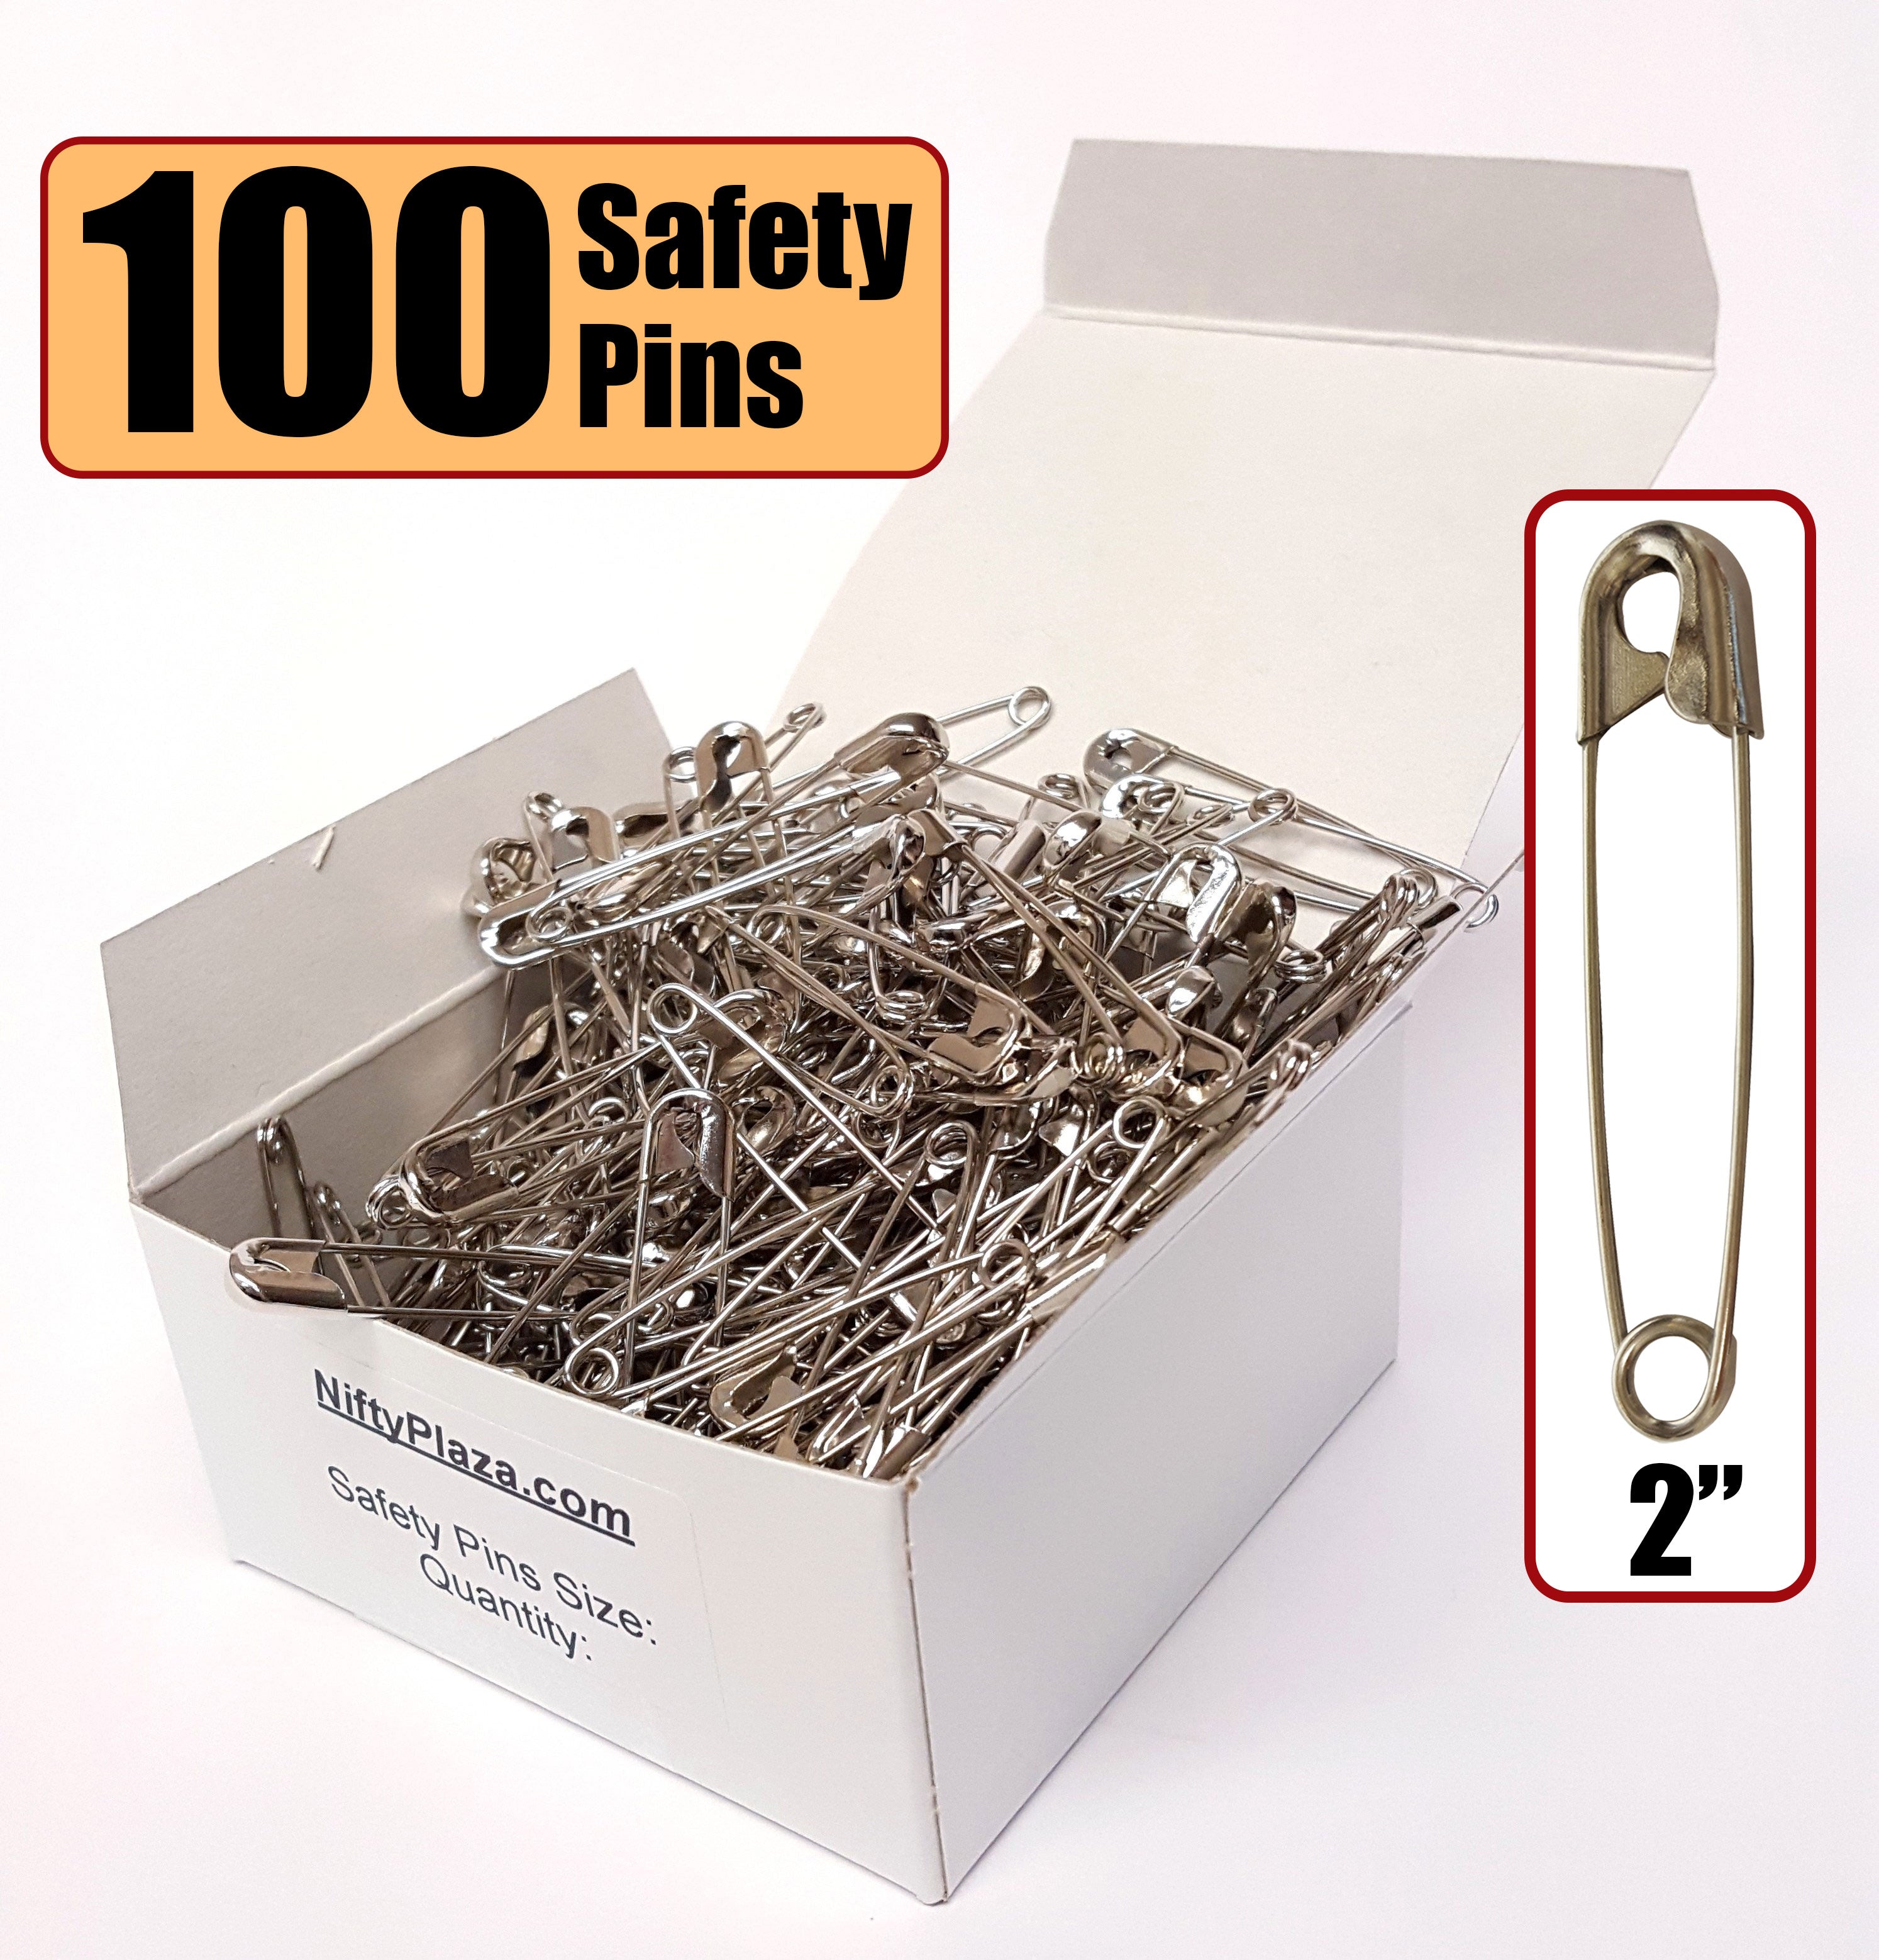 NiftyPlaza Extra Large Safety Pins, Size 2 Inch, 100 Safety Pins